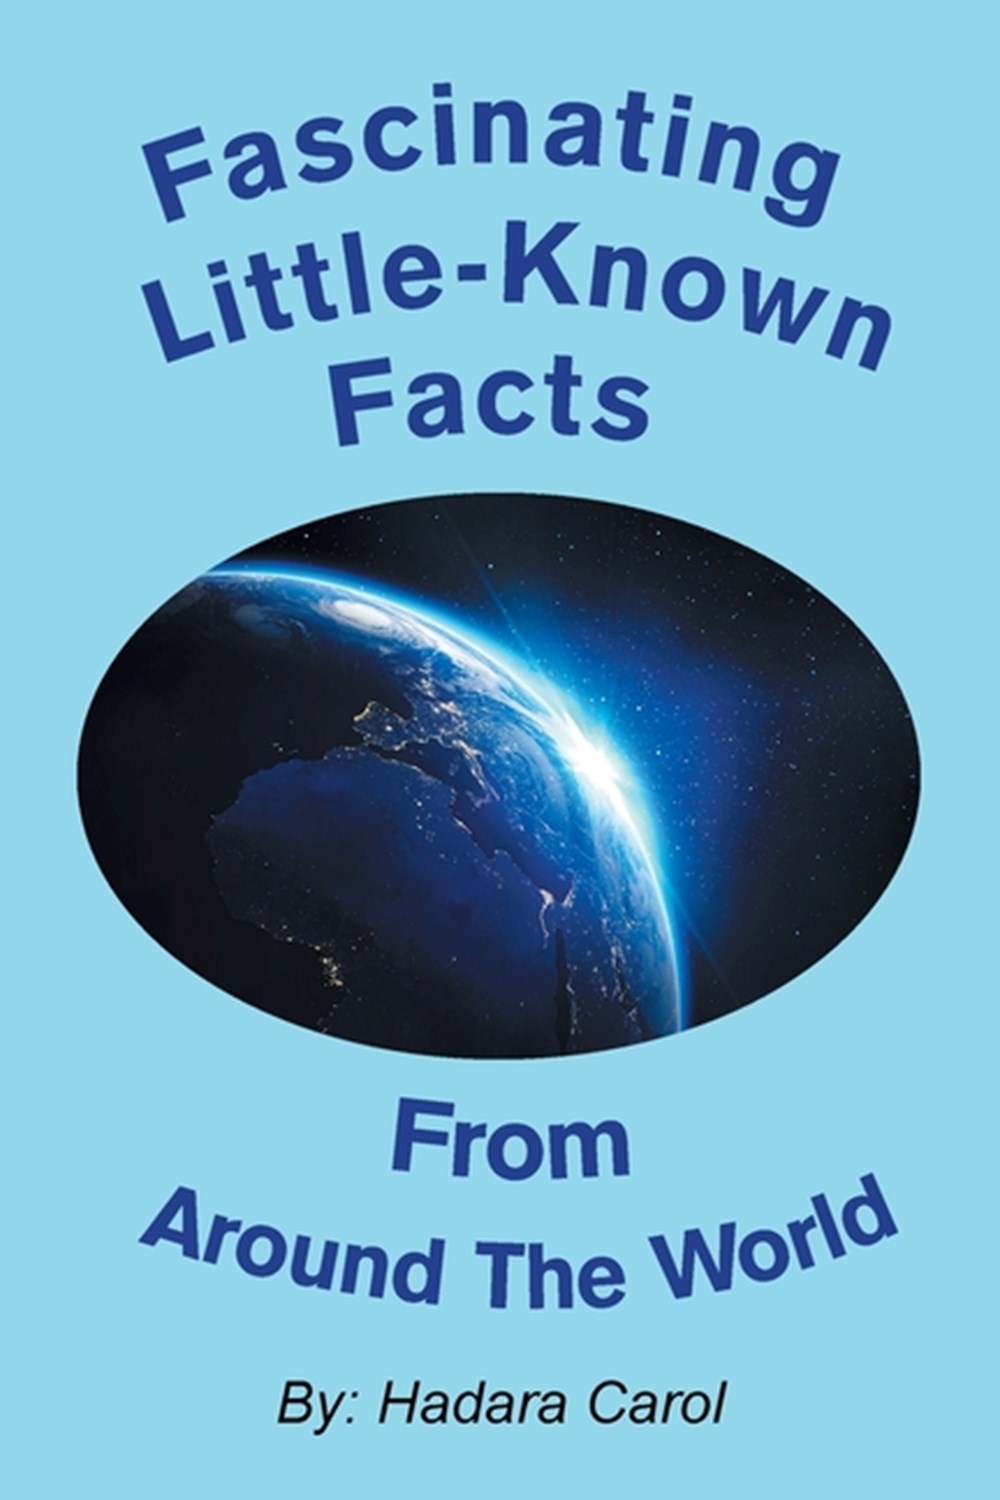 Fascinating Little-Known Facts from Around the World